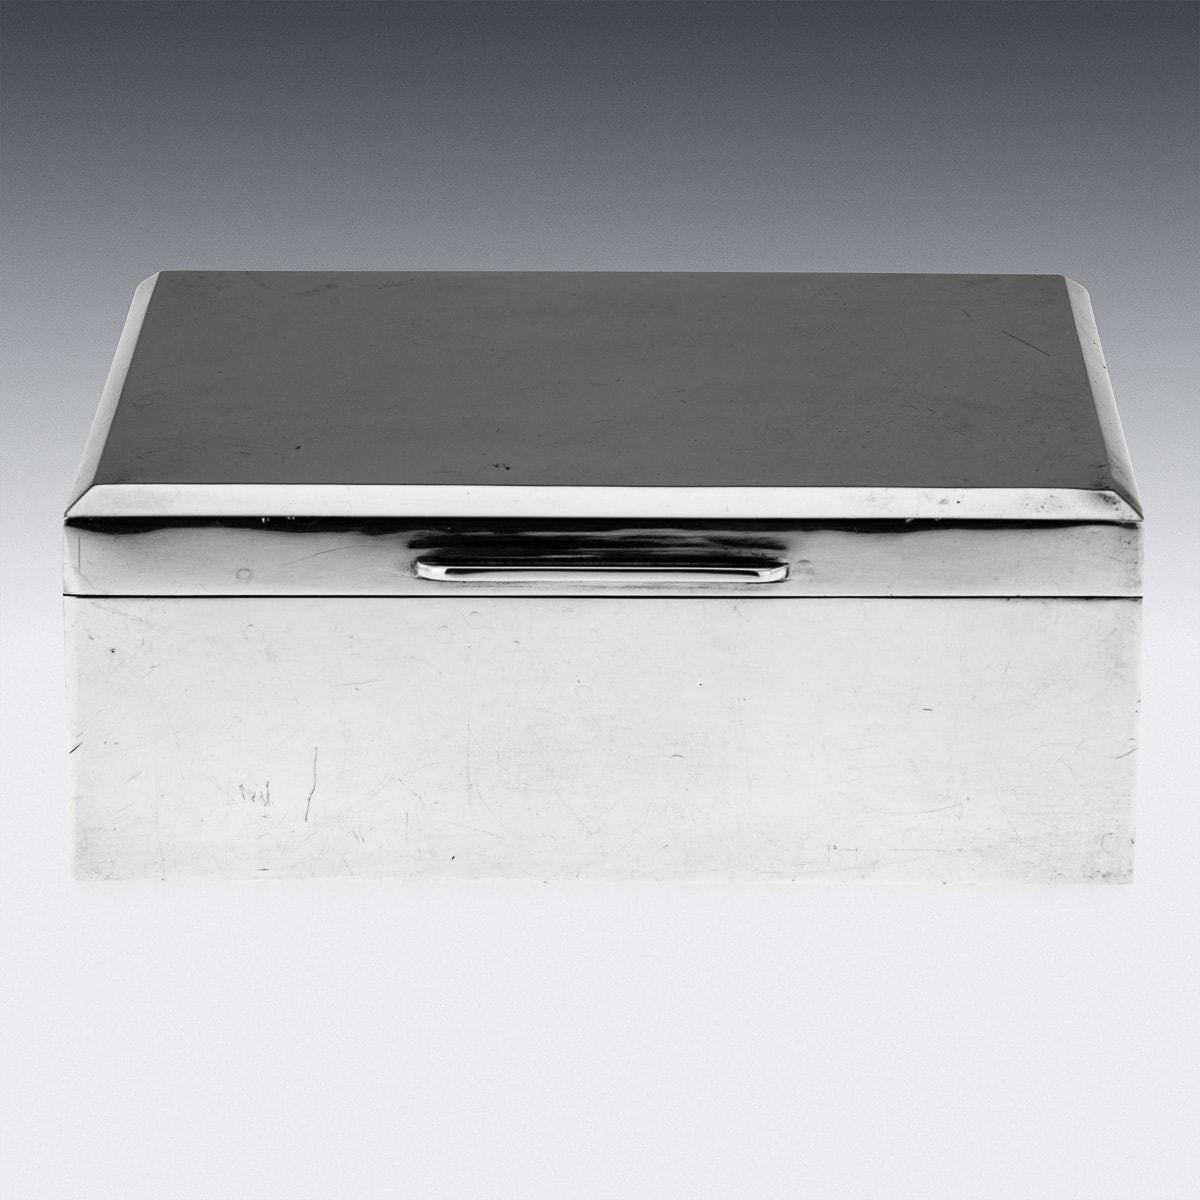 Elegant mid-20th Century solid silver cigar box, simplicity and elegance in equal measure, this understated solid silver cigar box just oozes quality. The original cedar wood lining helps keep thiose cigars fresh whilst the exterior is remarkably